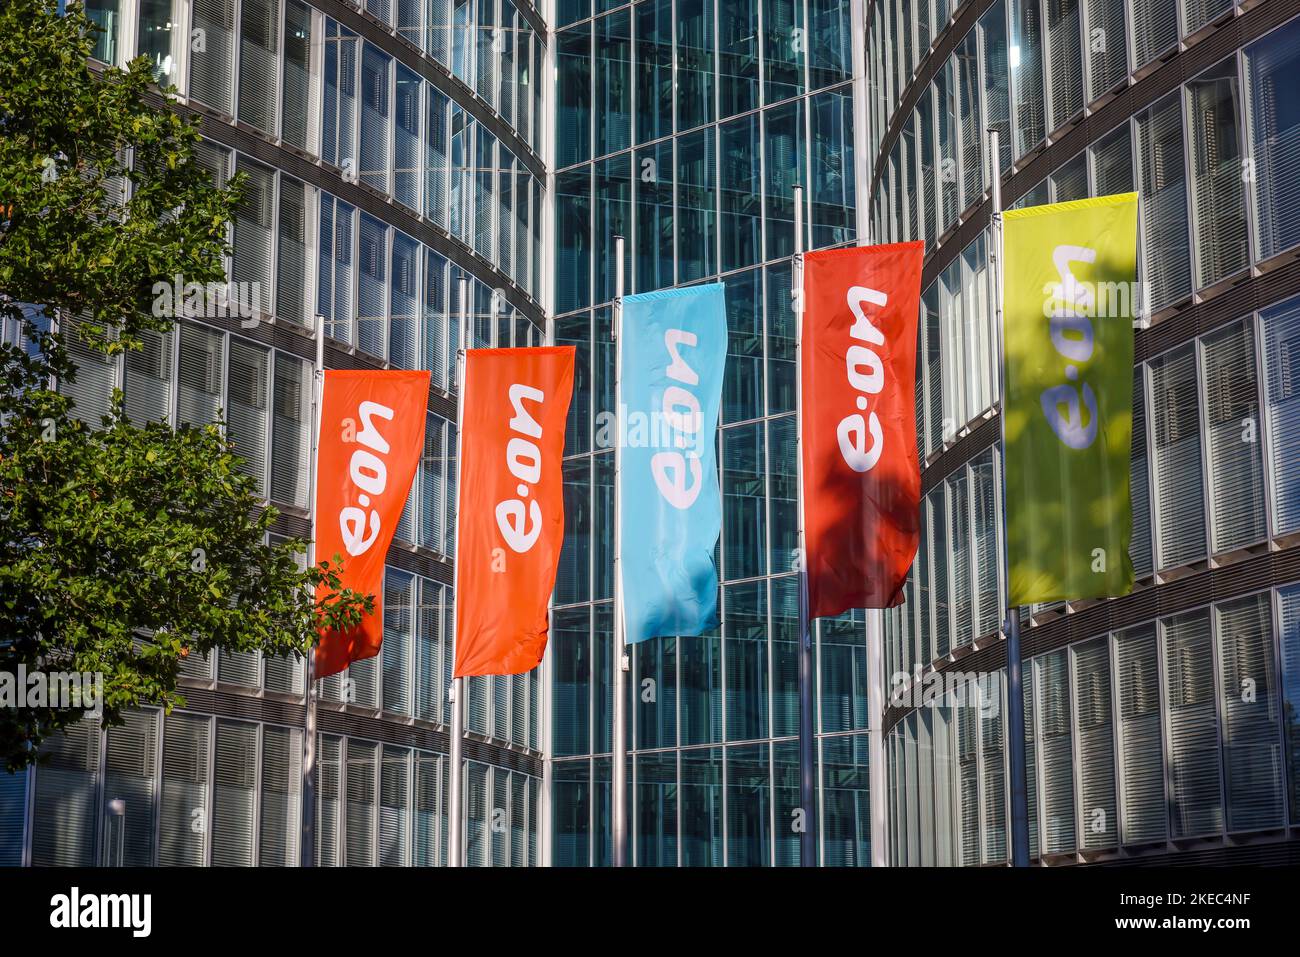 Essen, North Rhine-Westphalia, Germany - E.ON headquarters. e.on company logos on flags in front of the headquarters. Stock Photo